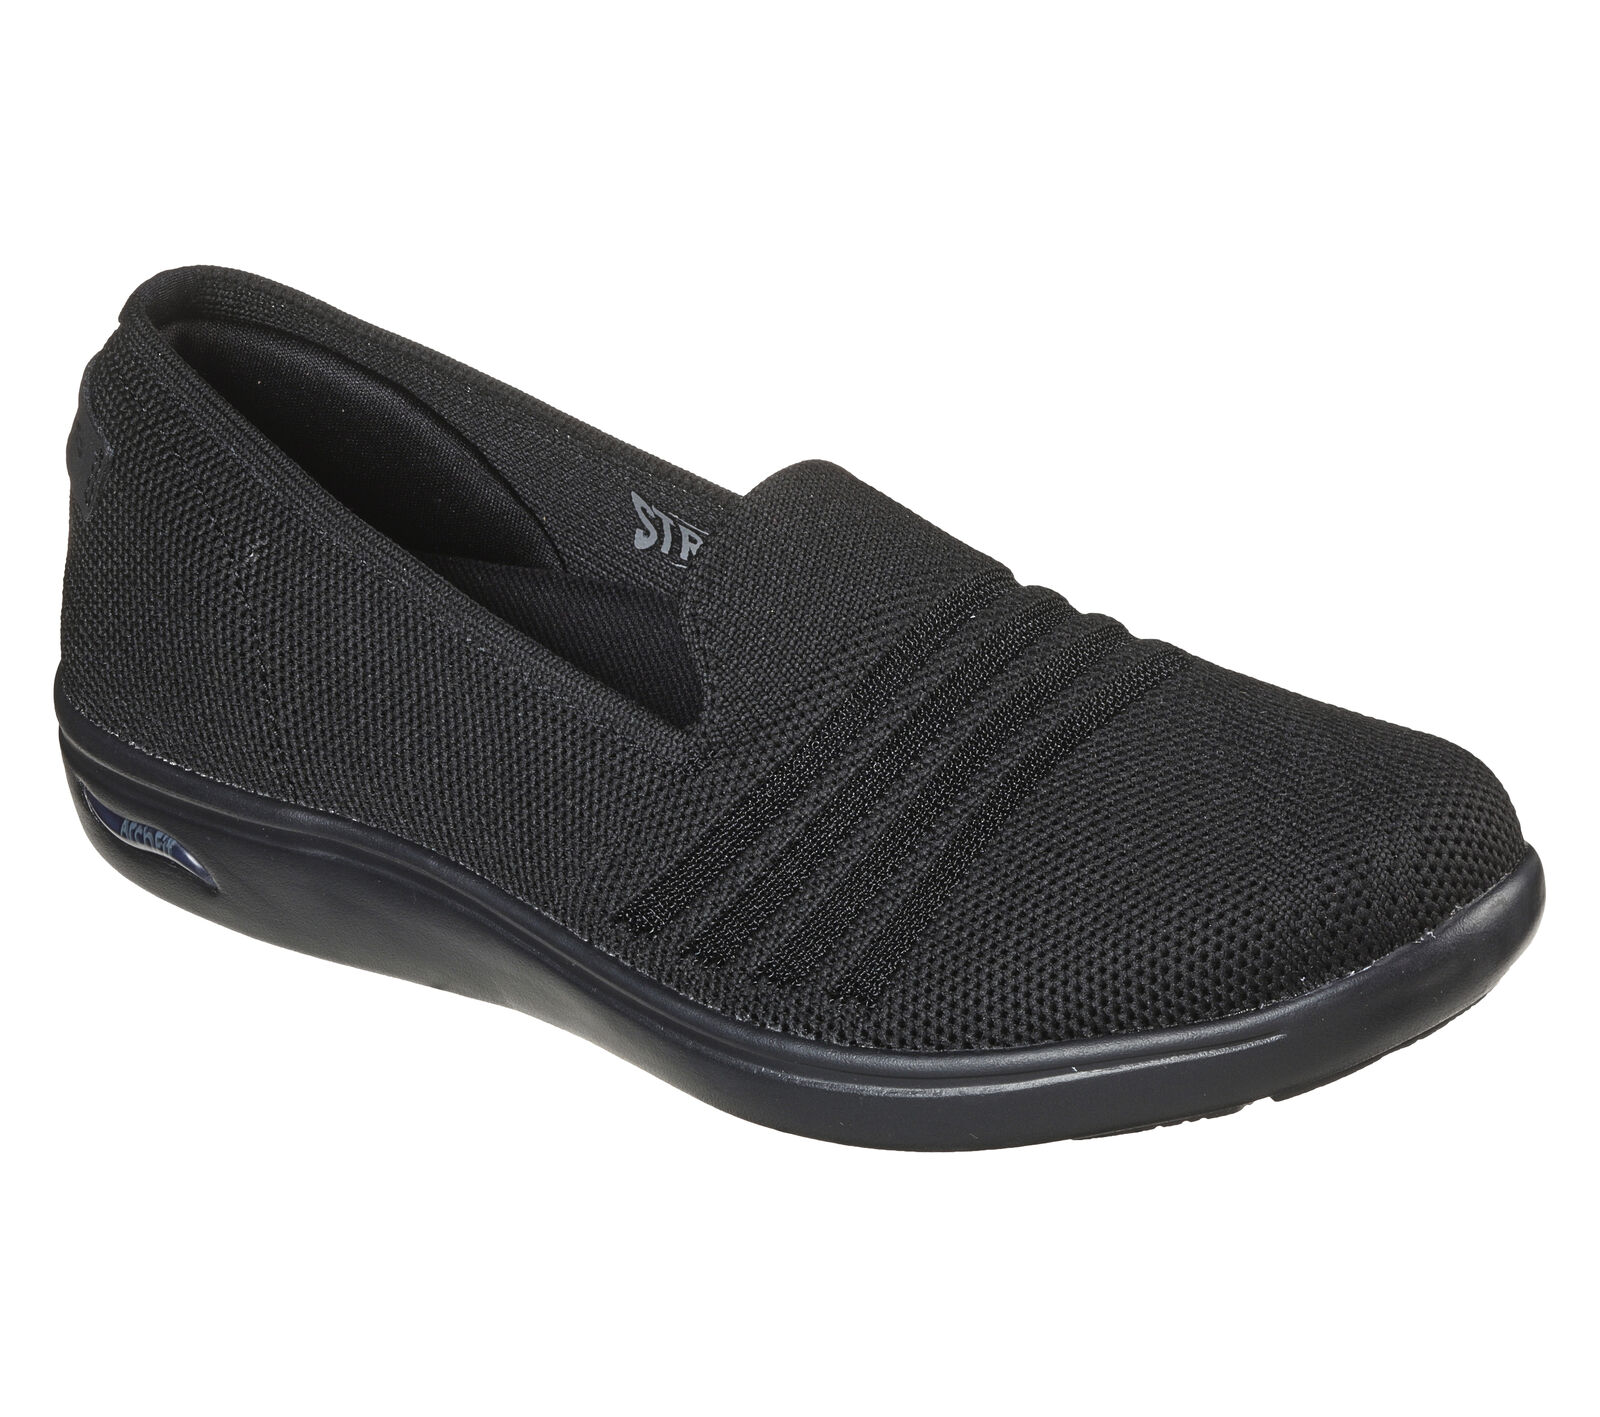 Shop the Skechers Arch Fit Uplift - Cutting Edge | SKECHERS